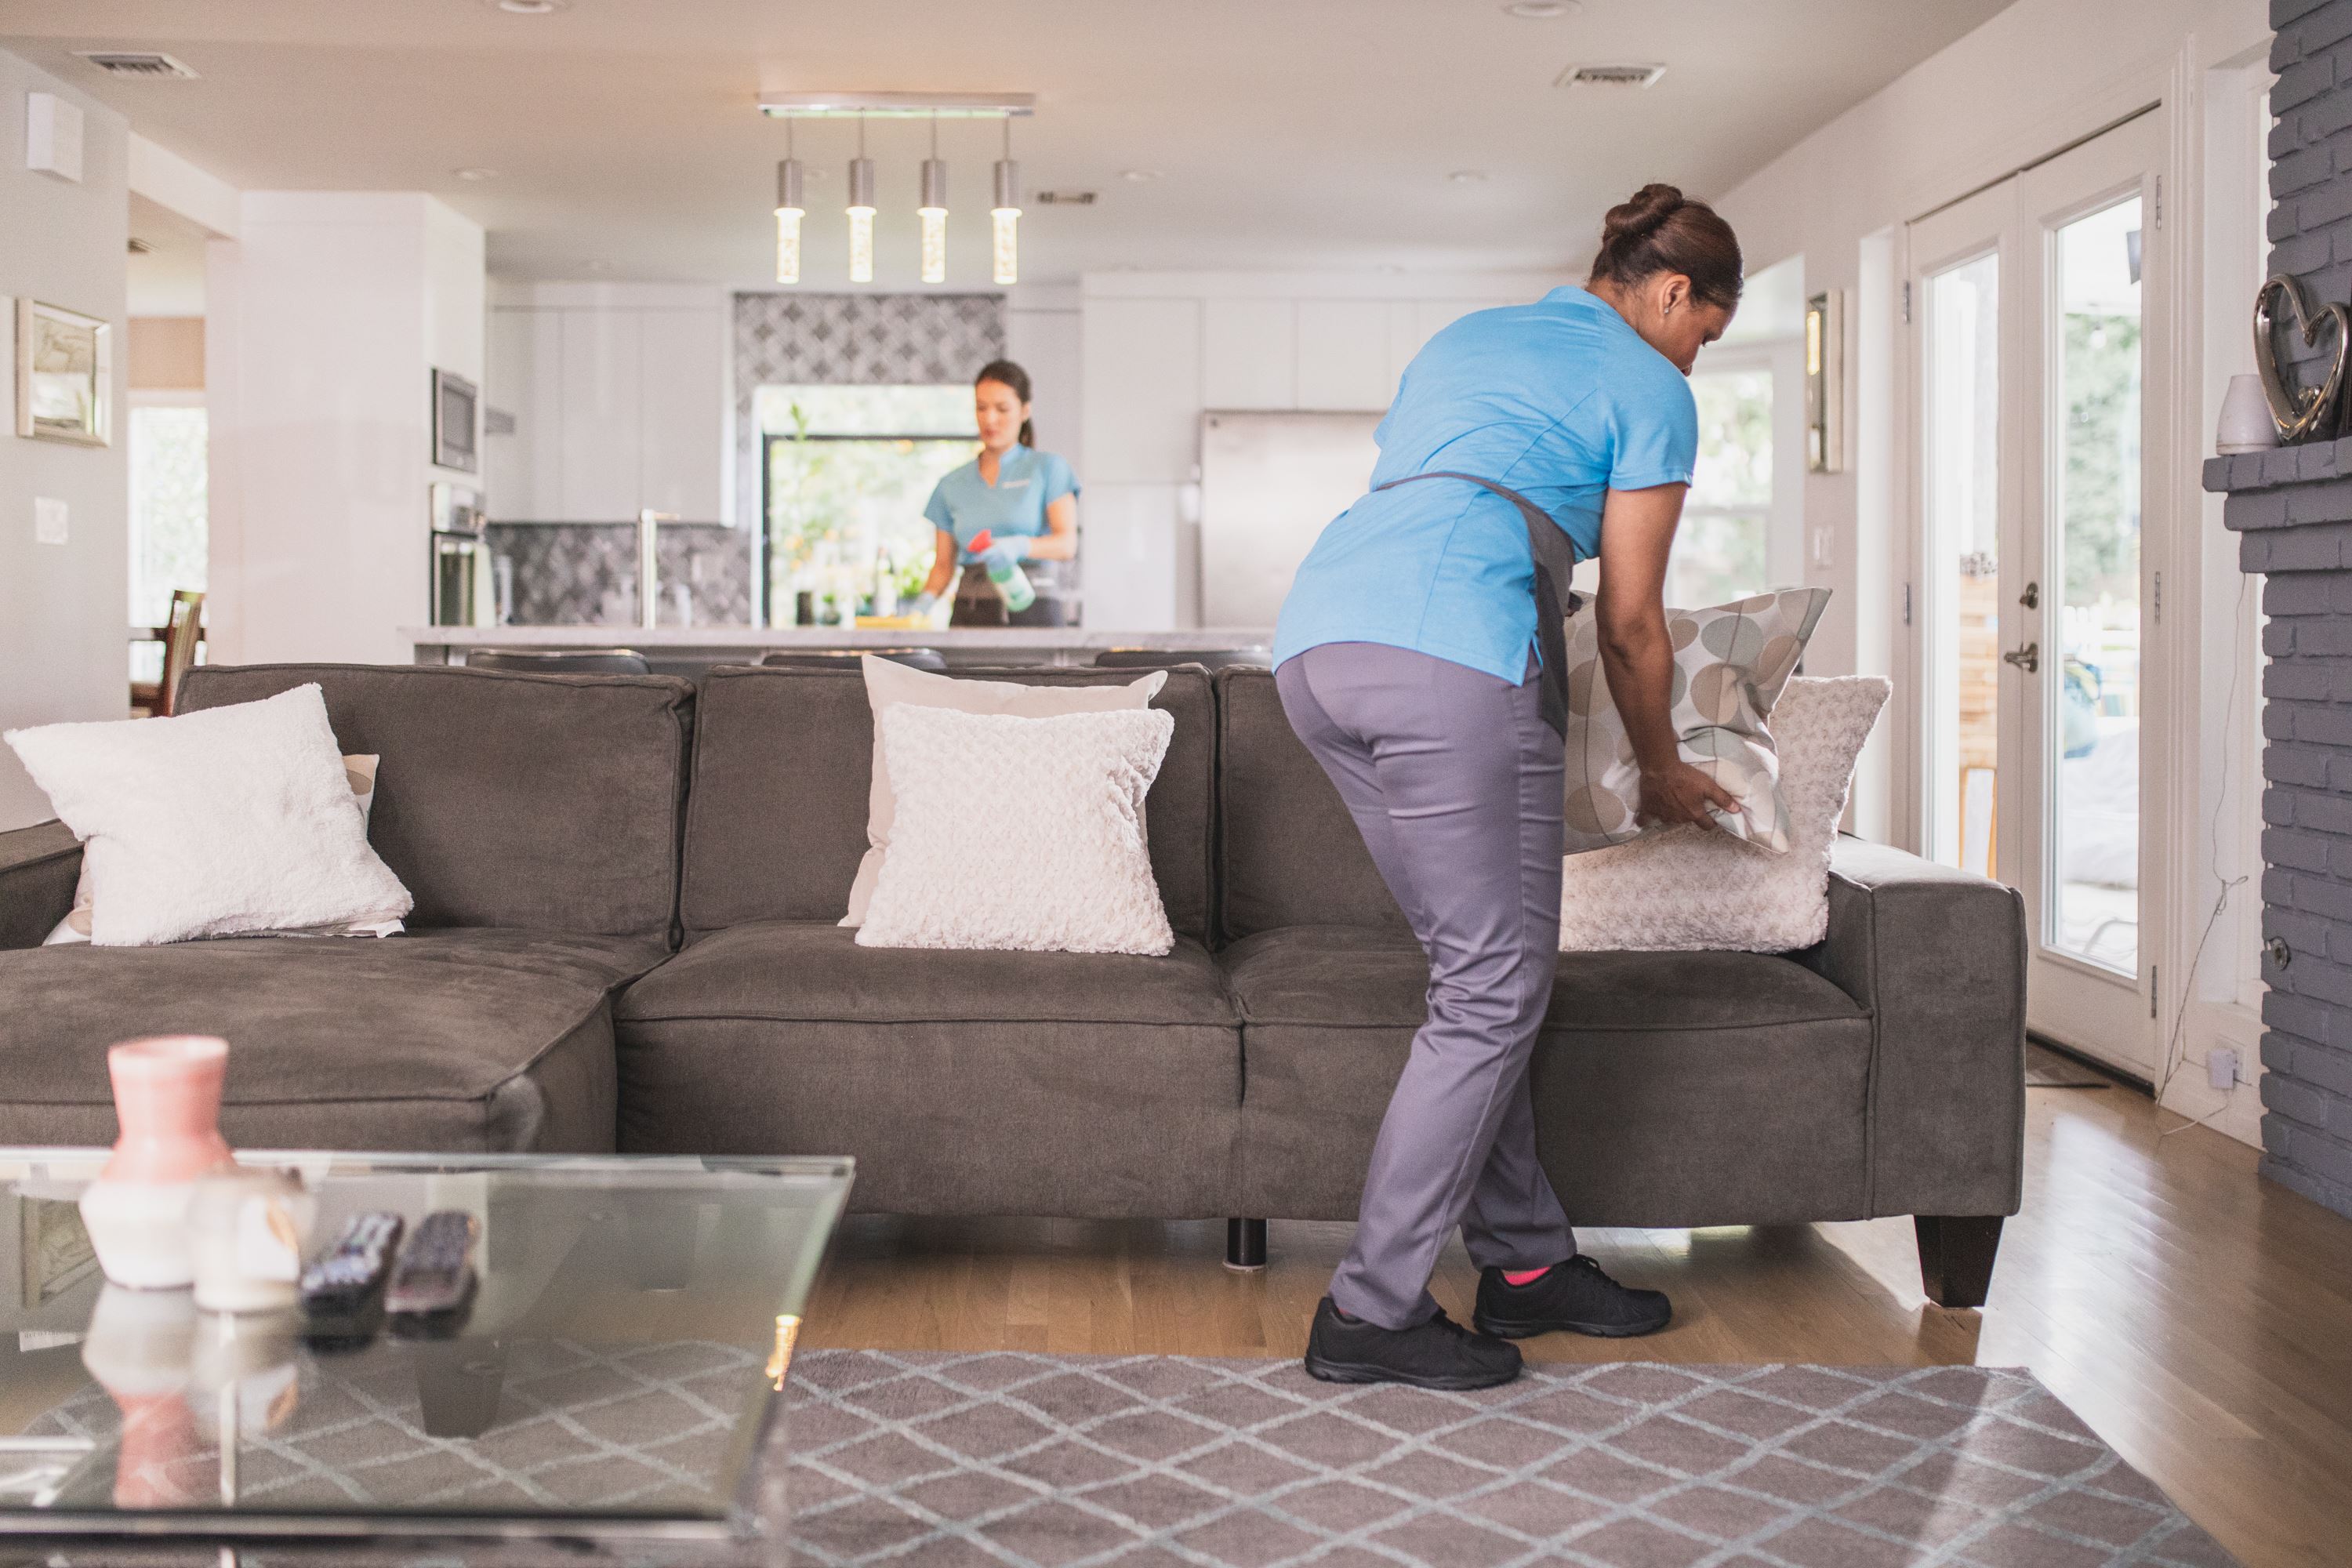 house cleaning services in Monmouth include light upholstery cleaning